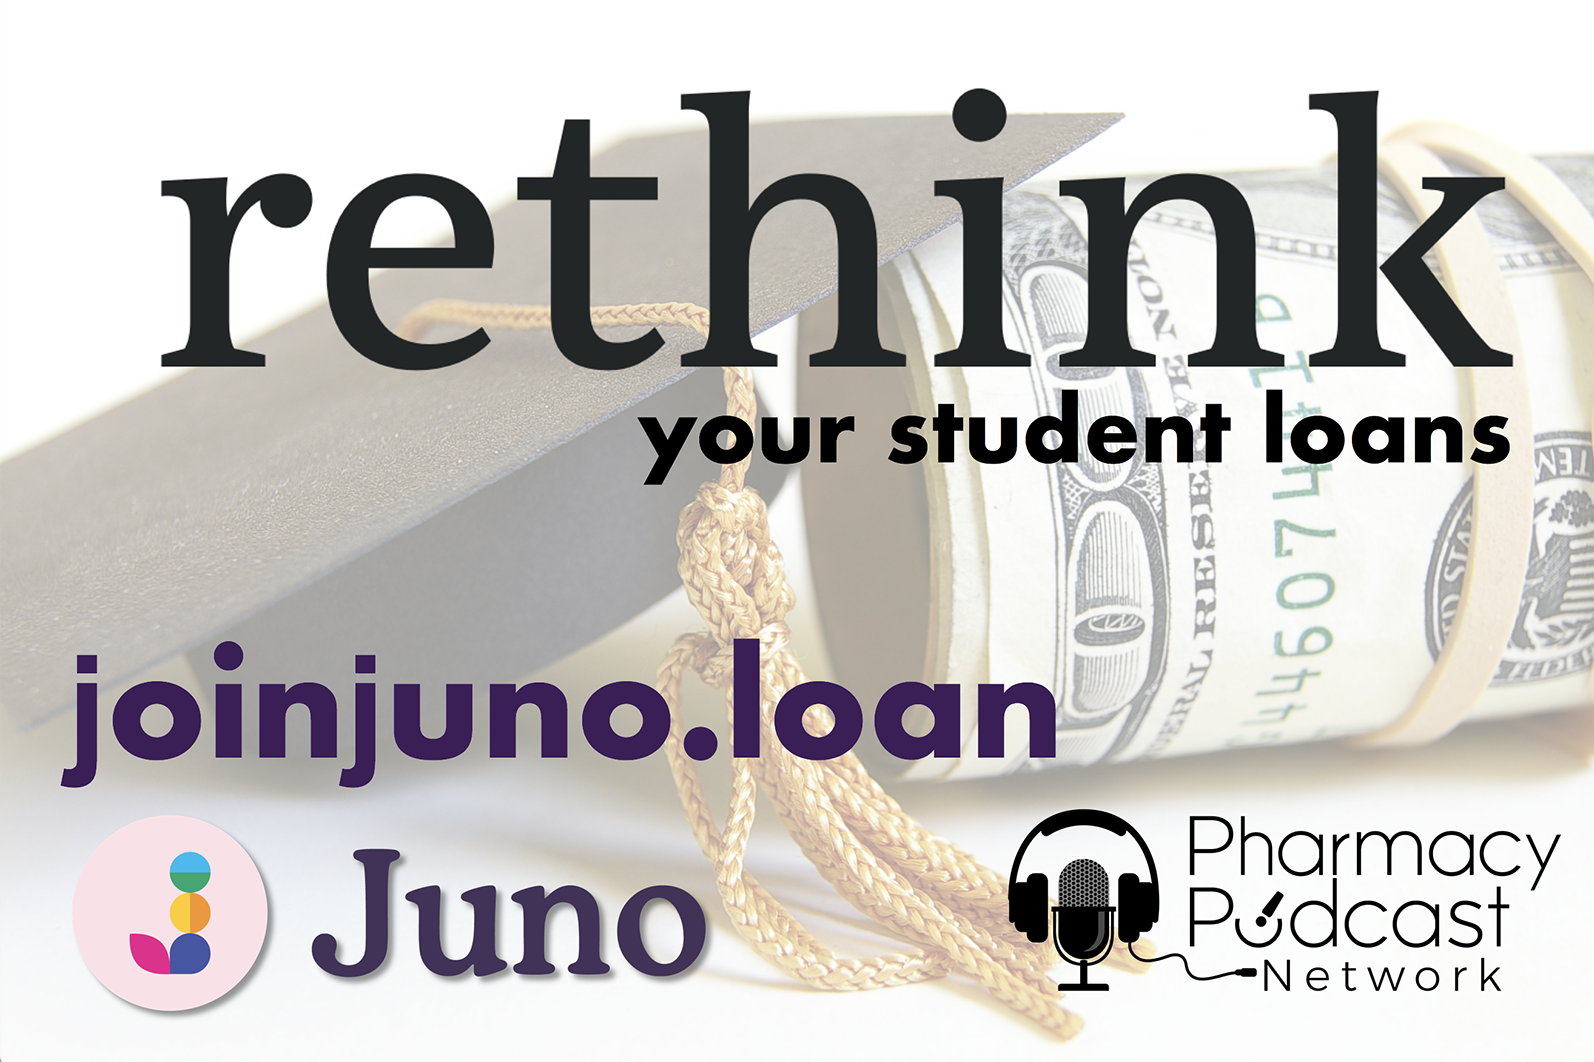 Pharmacy Student Loans are NOT COOL!! | JoinJuno.loan